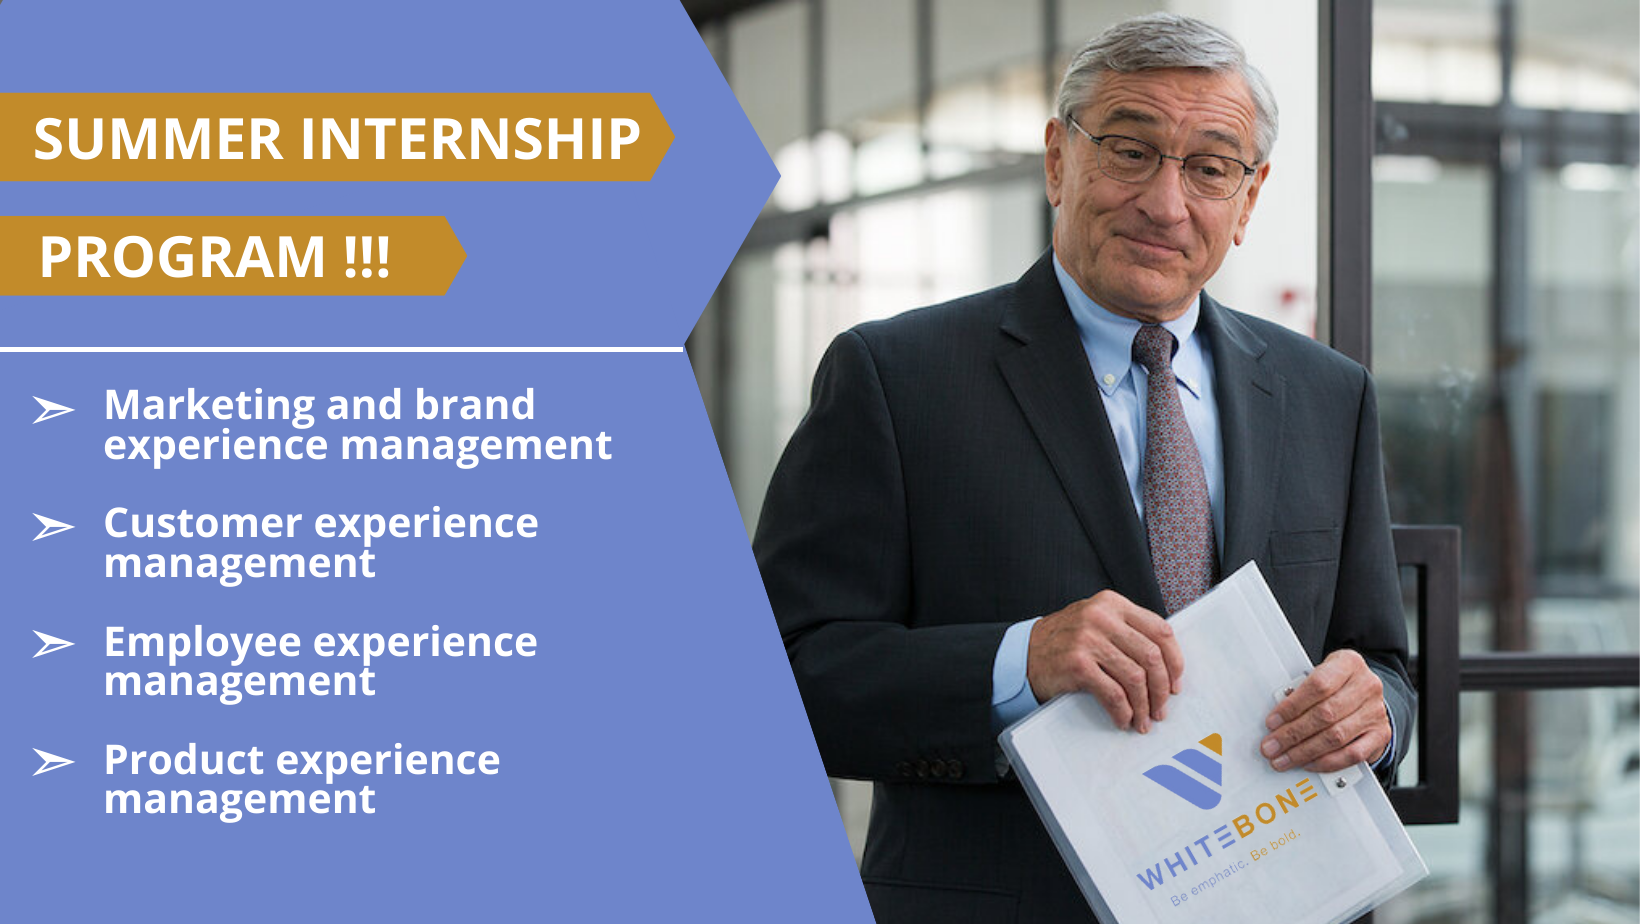 You are currently viewing Whitebone | Summer internship program 2022<br><br><br><br>